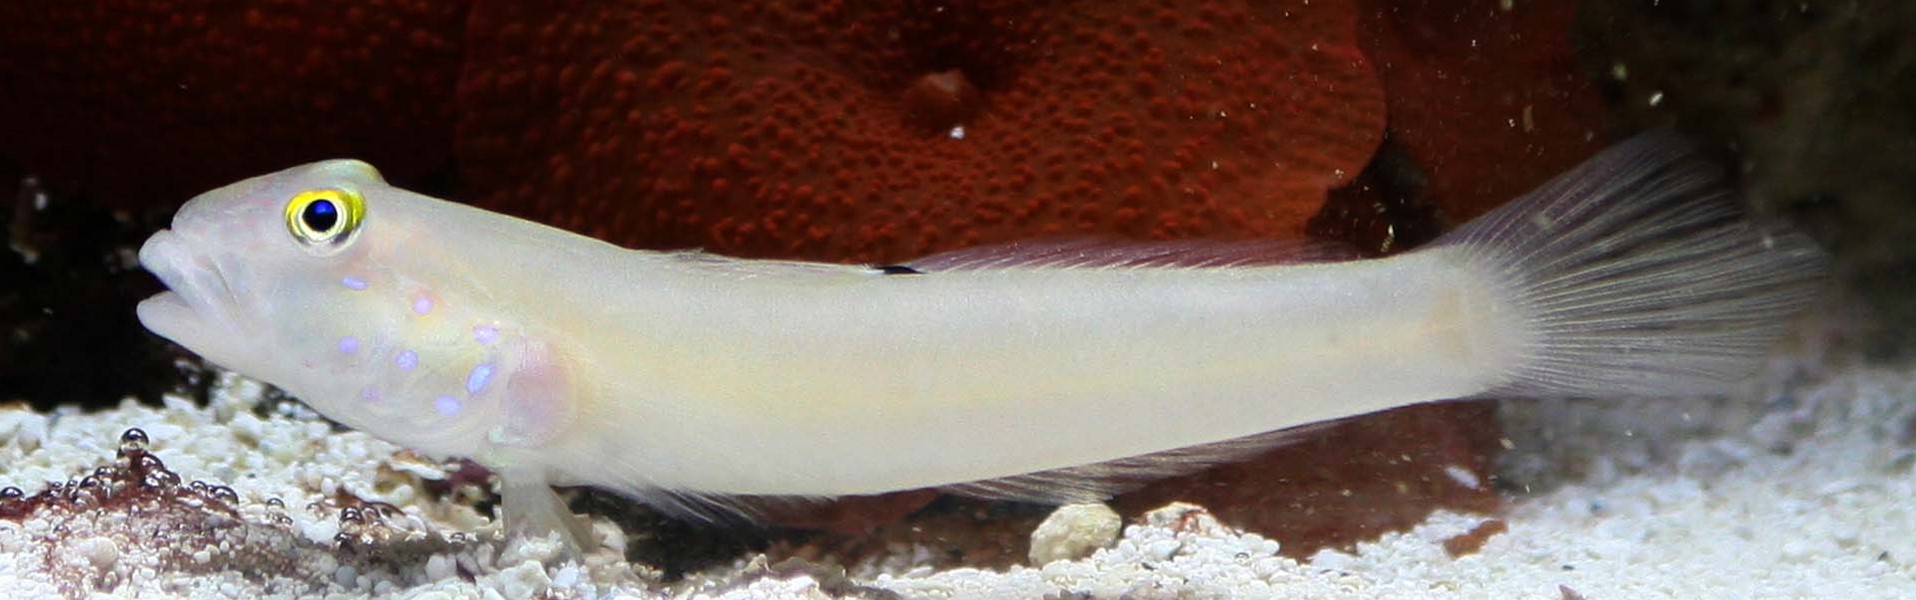 The Sixspot Goby